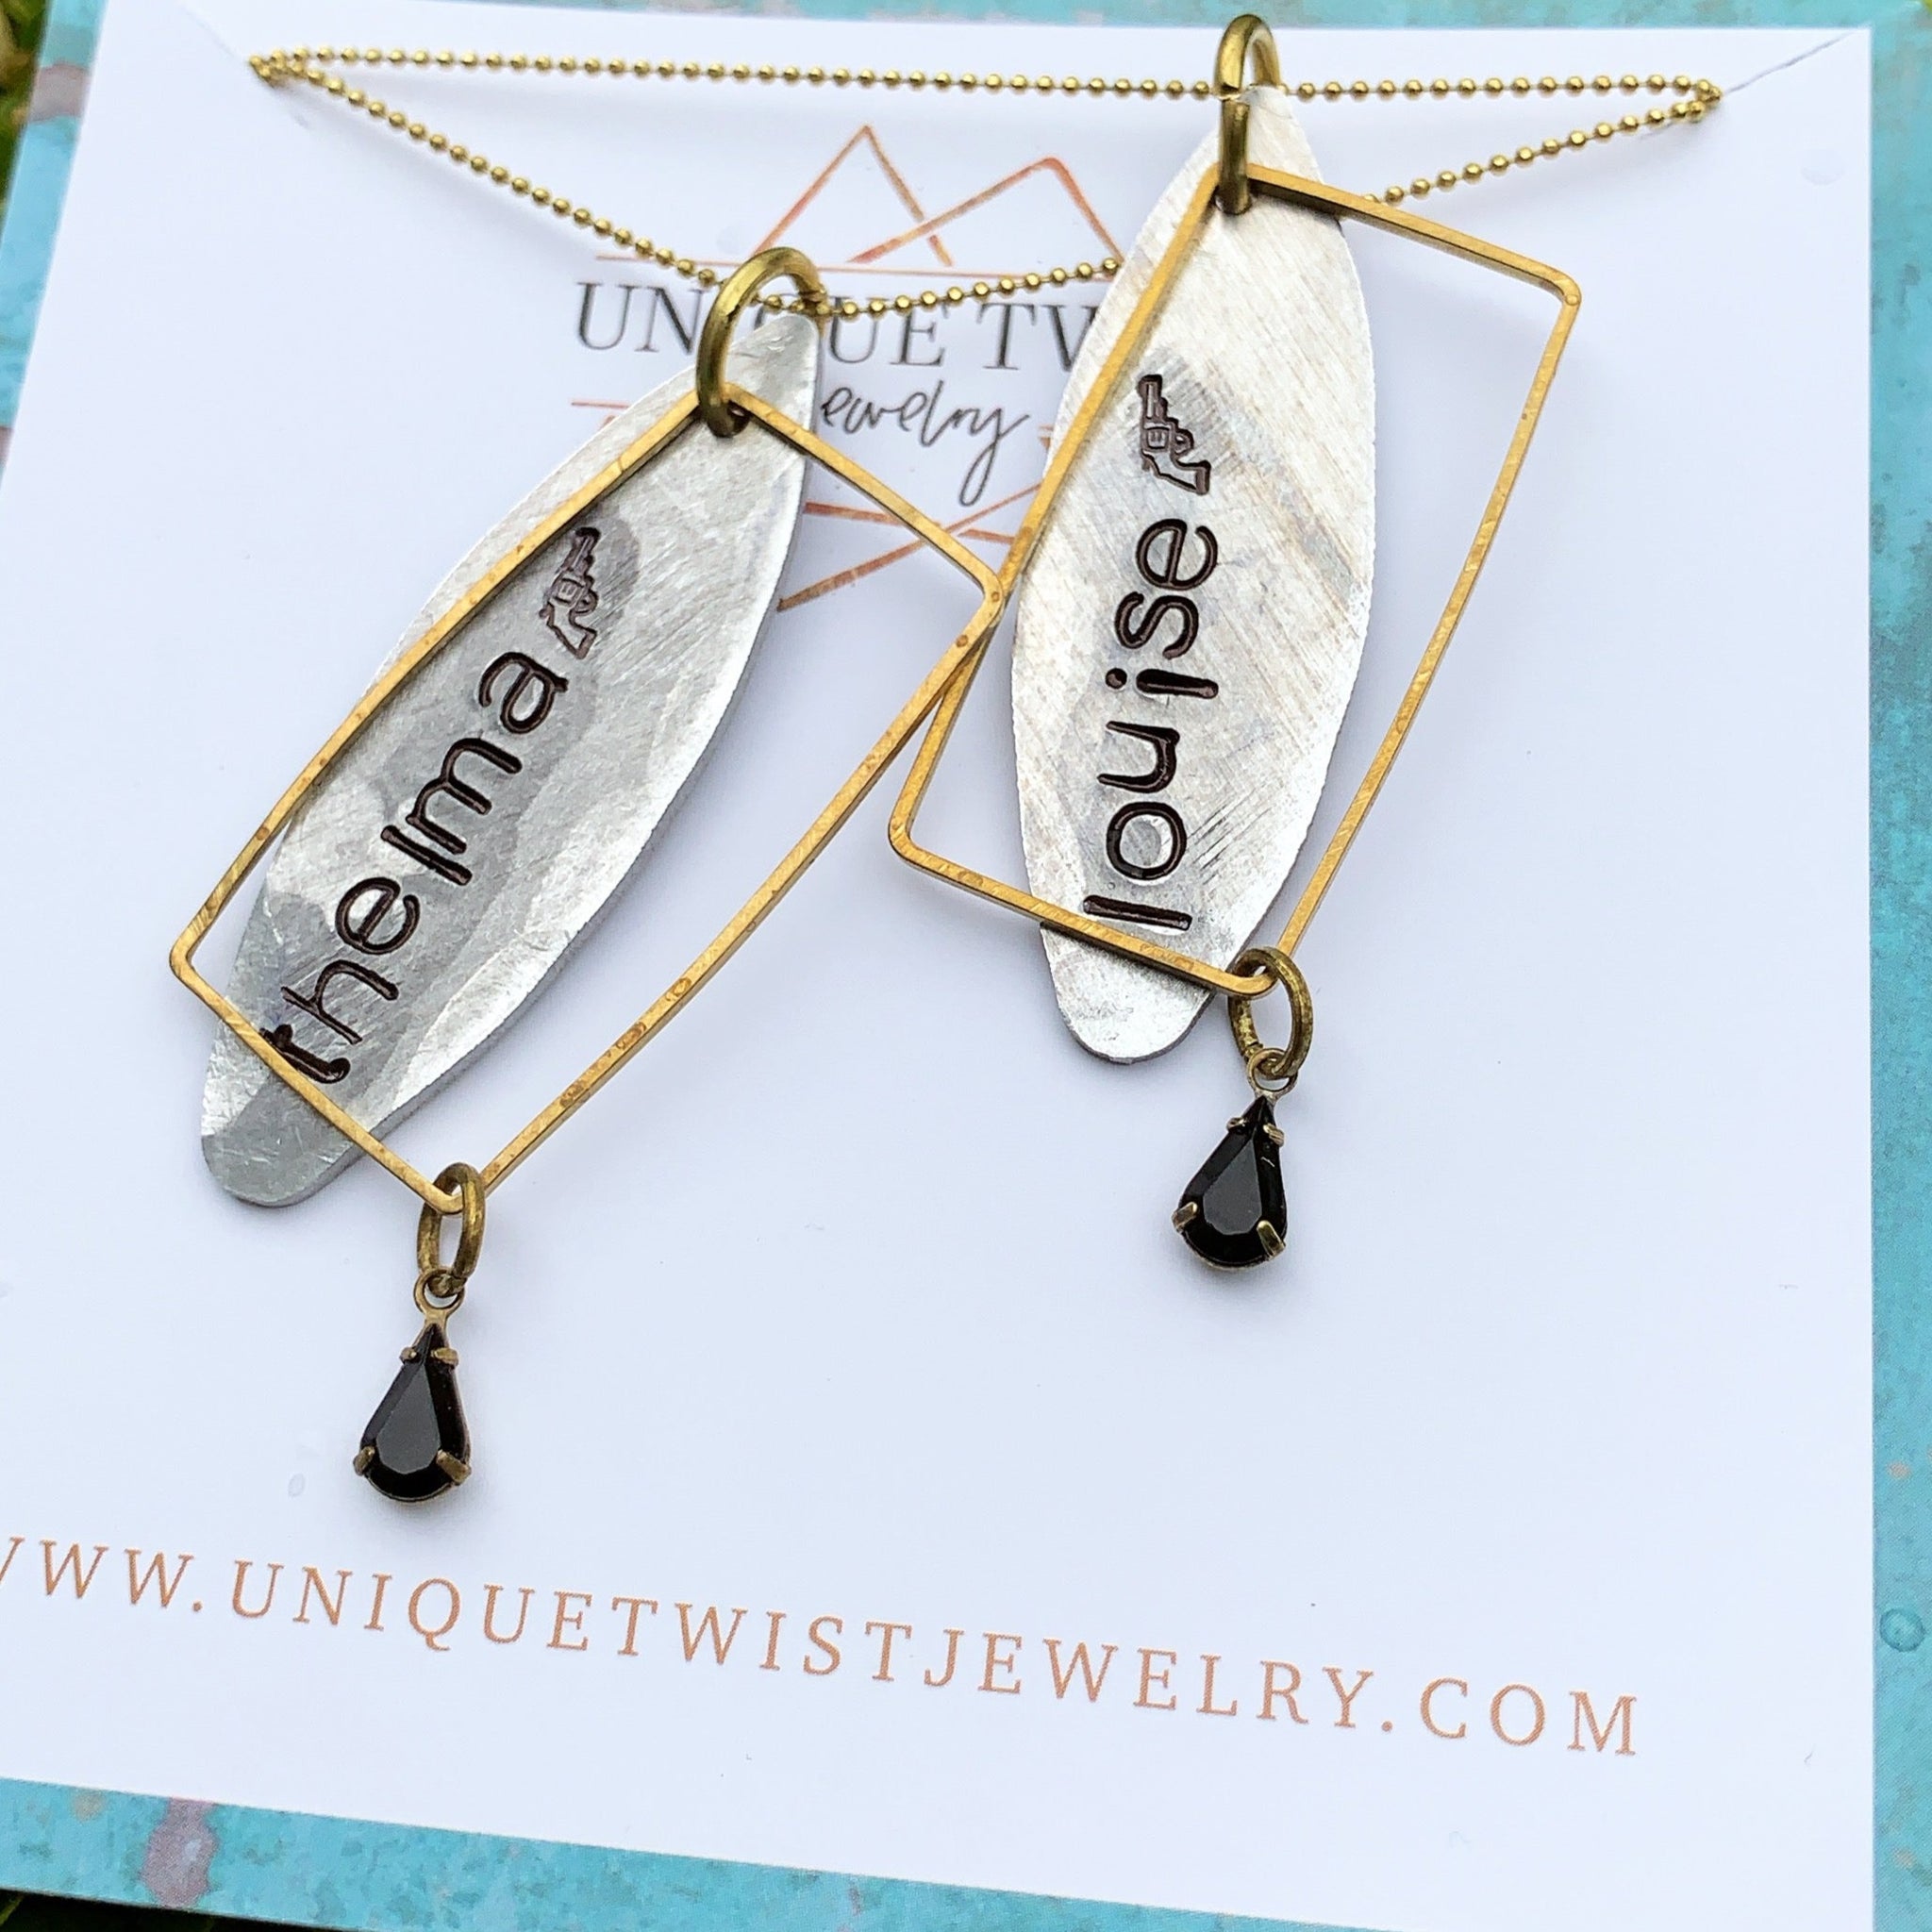 Thelma and Louise Necklace Set –